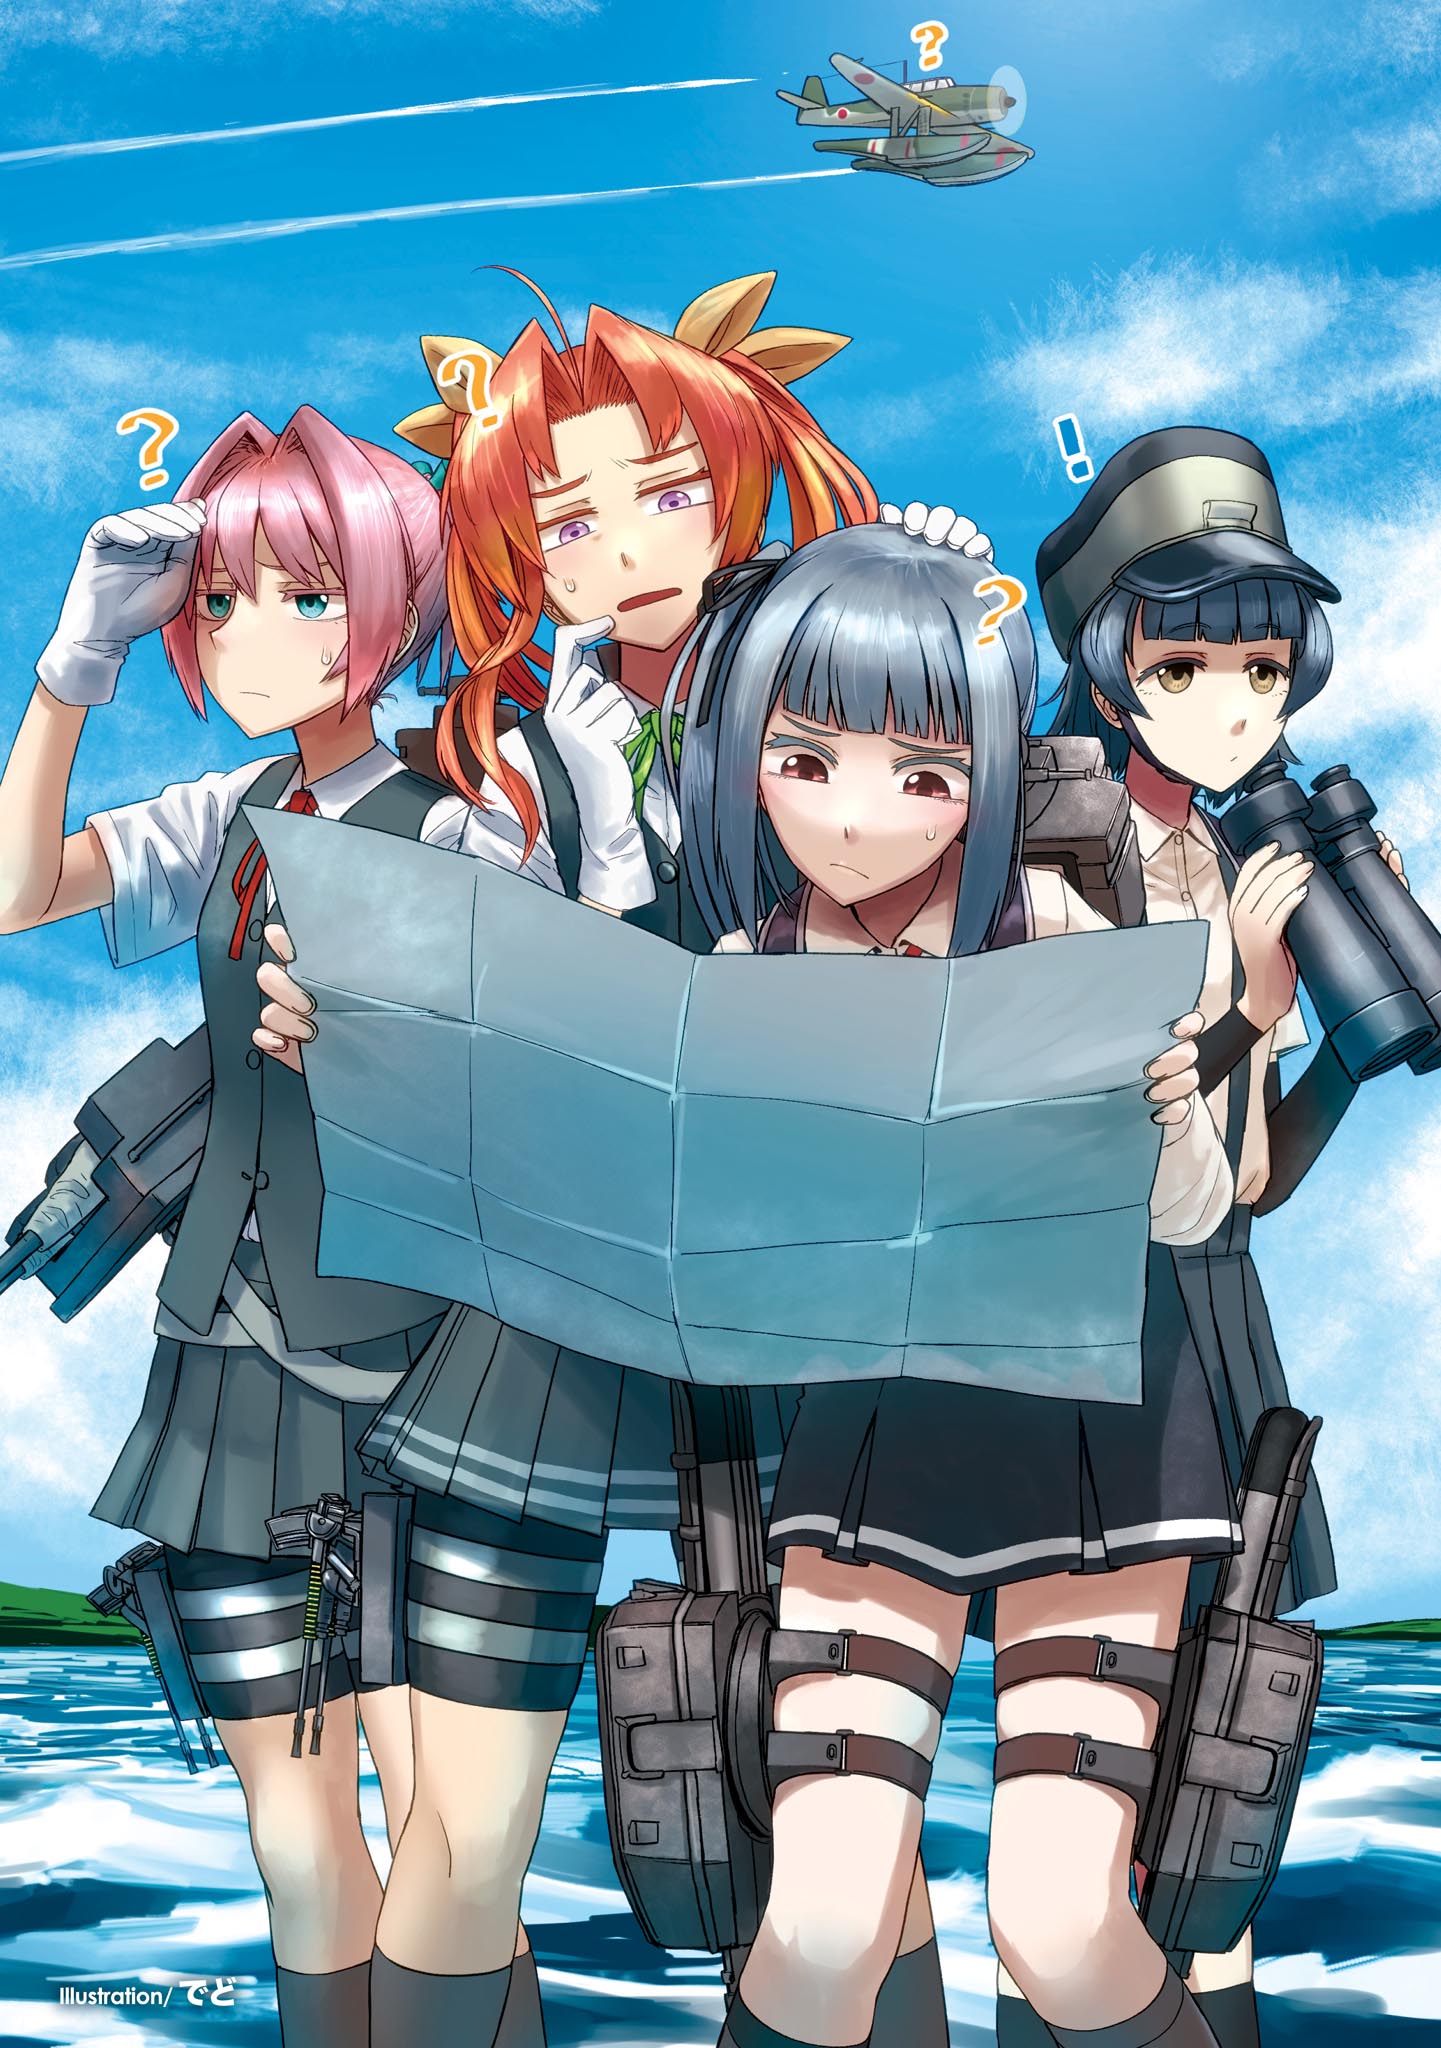 ! 4girls ? aircraft airplane aqua_eyes arare_(kantai_collection) black_hair blue_eyes brown_eyes clouds didloaded grey_vest hat highres imperial_japanese_navy kagerou_(kantai_collection) kantai_collection kasumi_(kantai_collection) multiple_girls pink_hair school_uniform shiranui_(kantai_collection) shirt short_hair short_sleeves skirt sky suspenders vest white_shirt